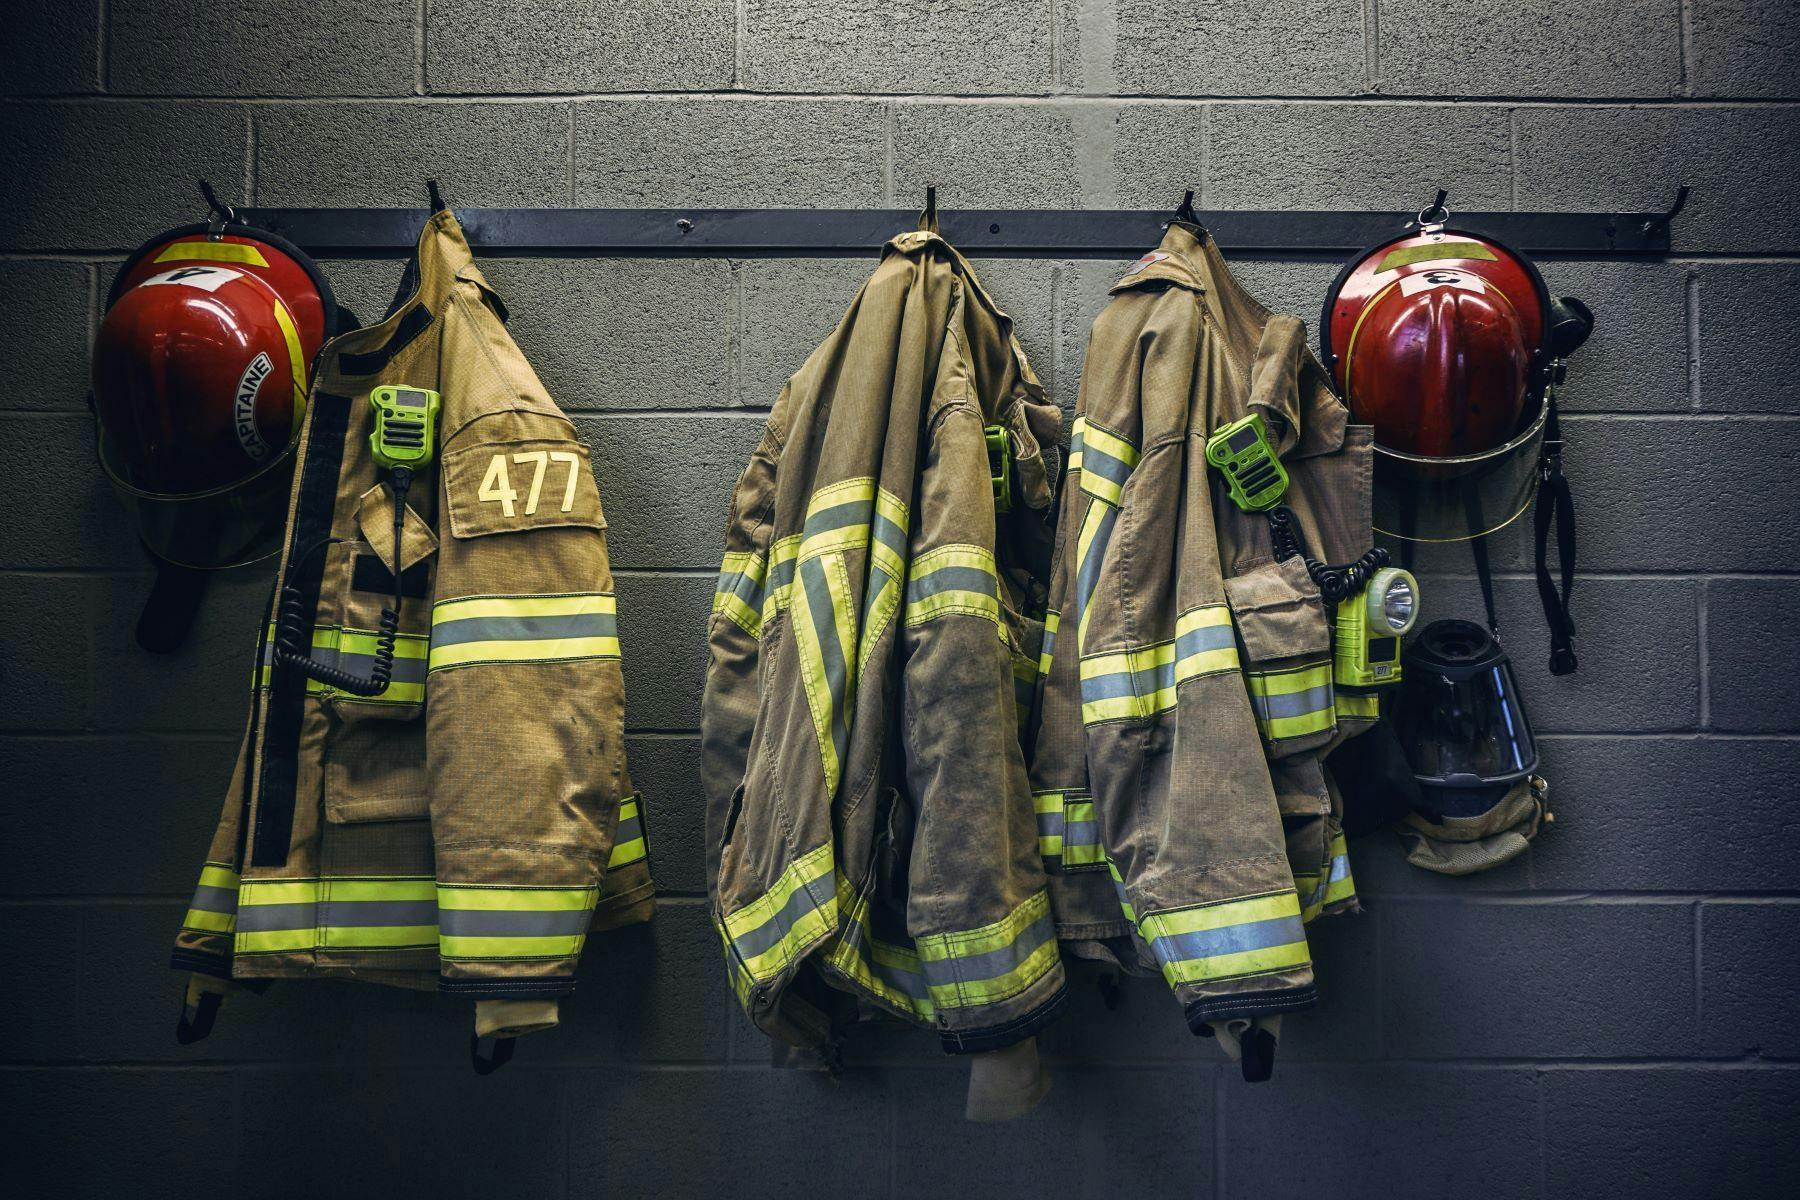 Firefighter jackets and helmets hanging